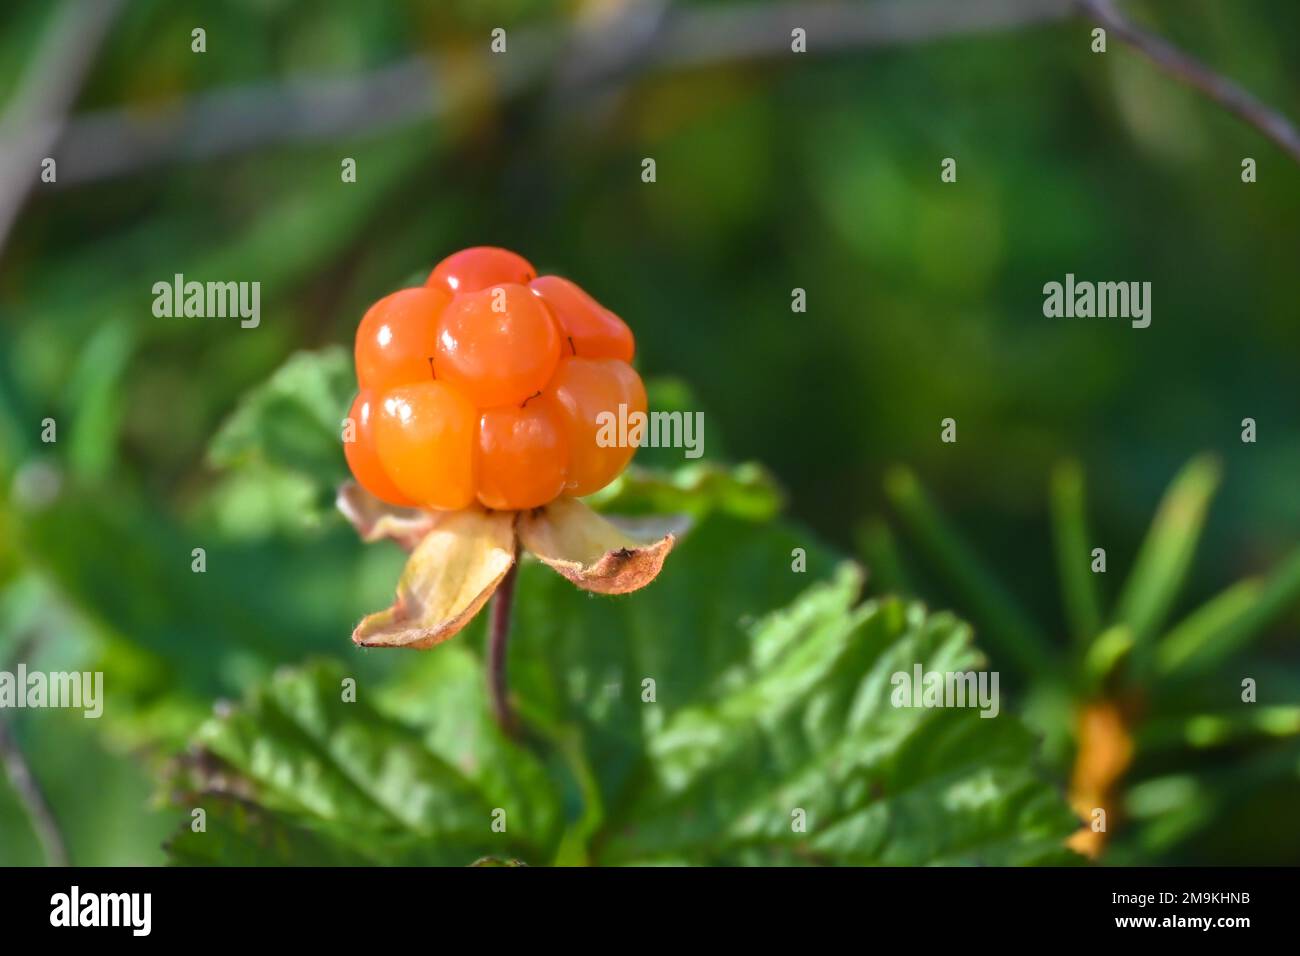 Ripe cloudberry. Cloudberry berry, illuminated by the sun, against a background of greenery. Stock Photo